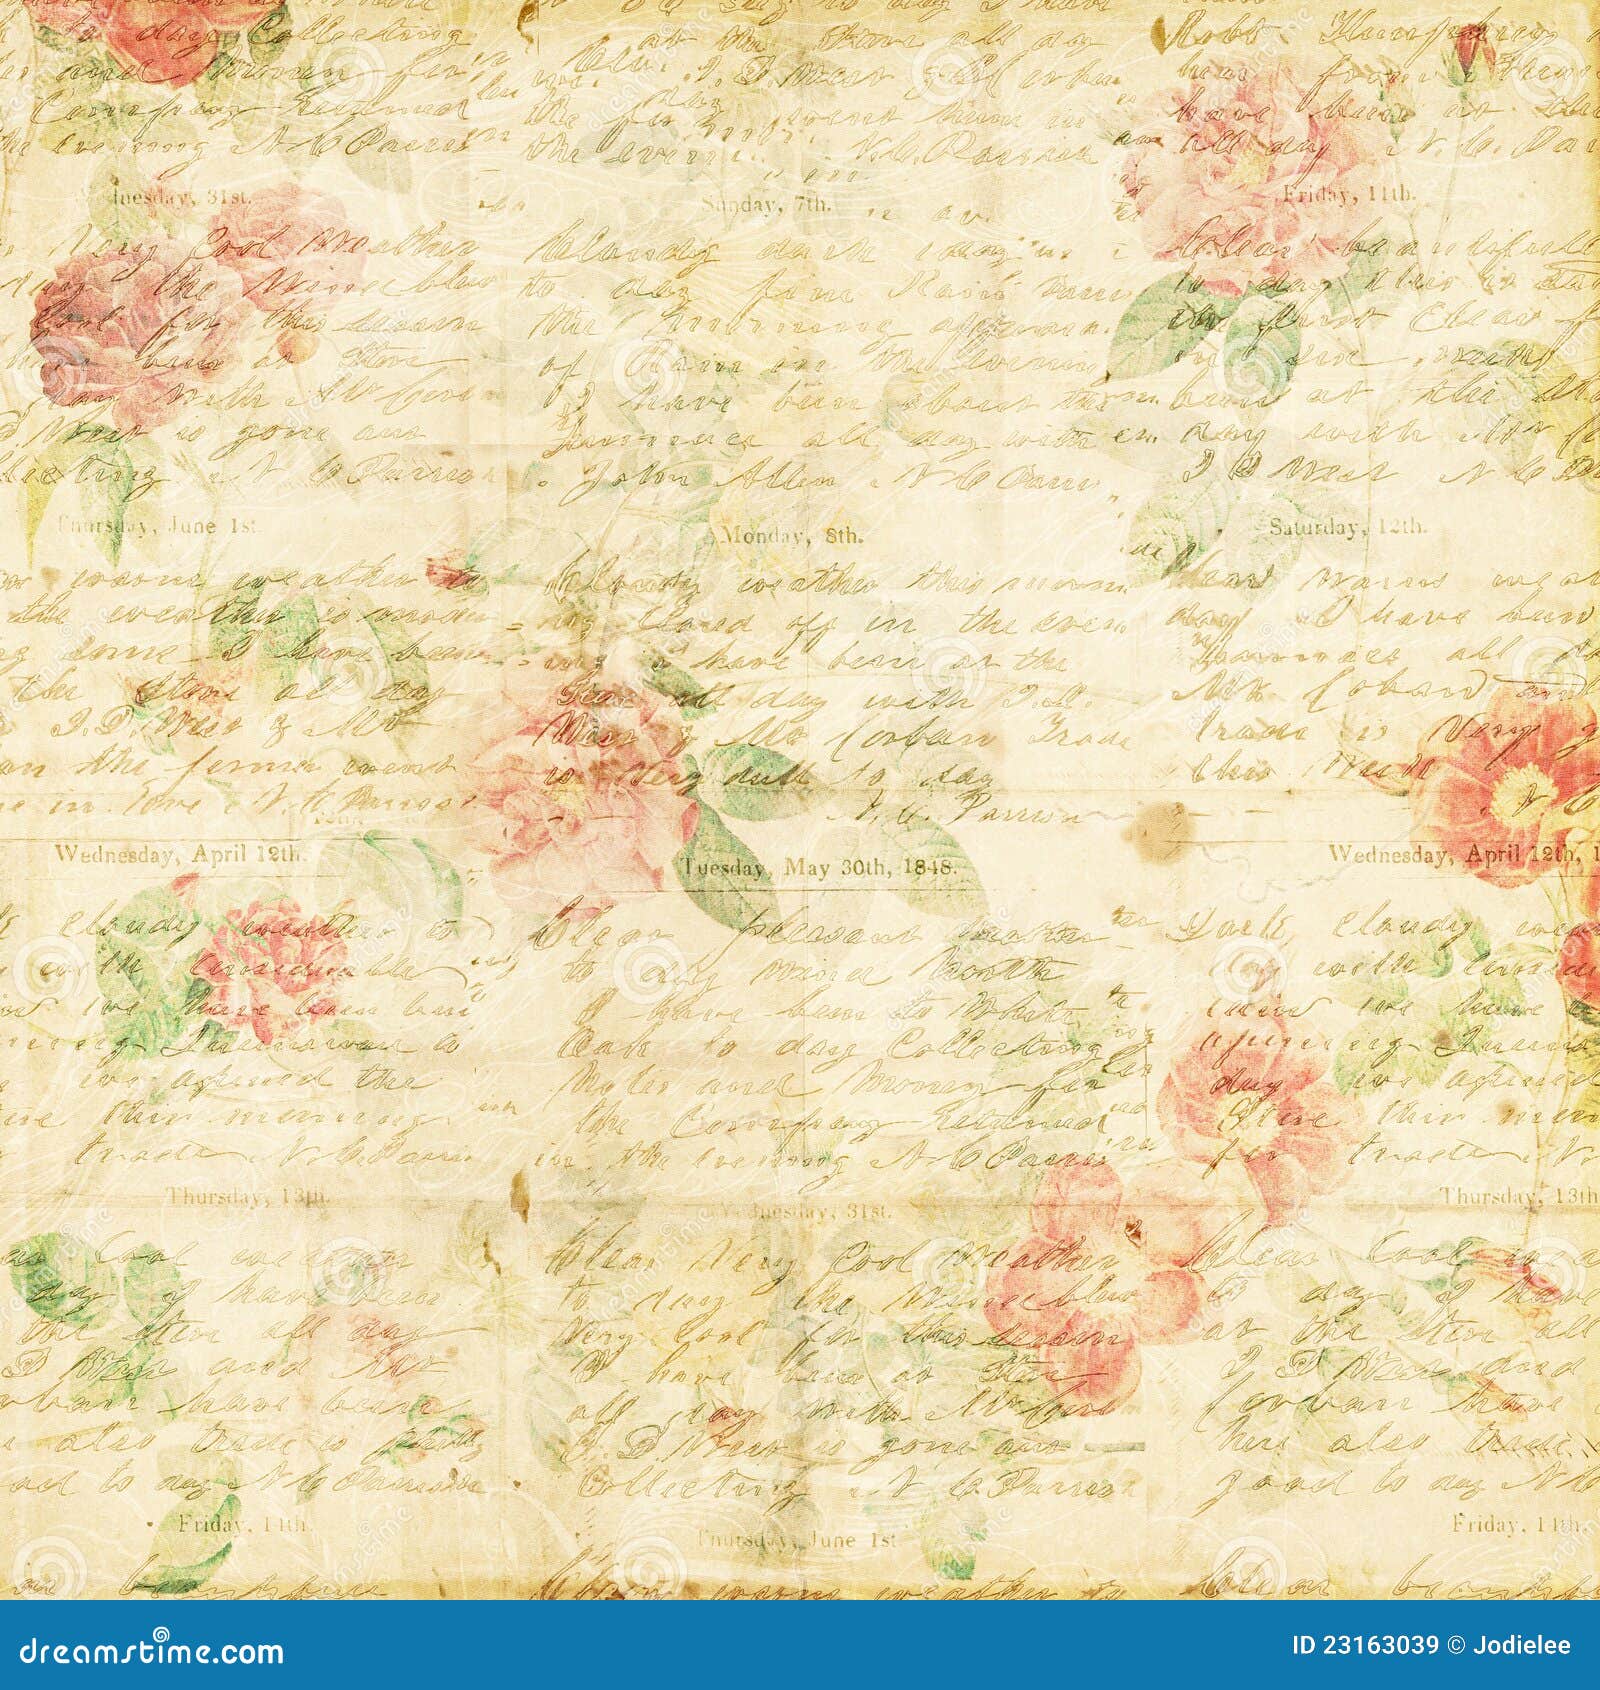 shabby chic vintage rose floral grungy background